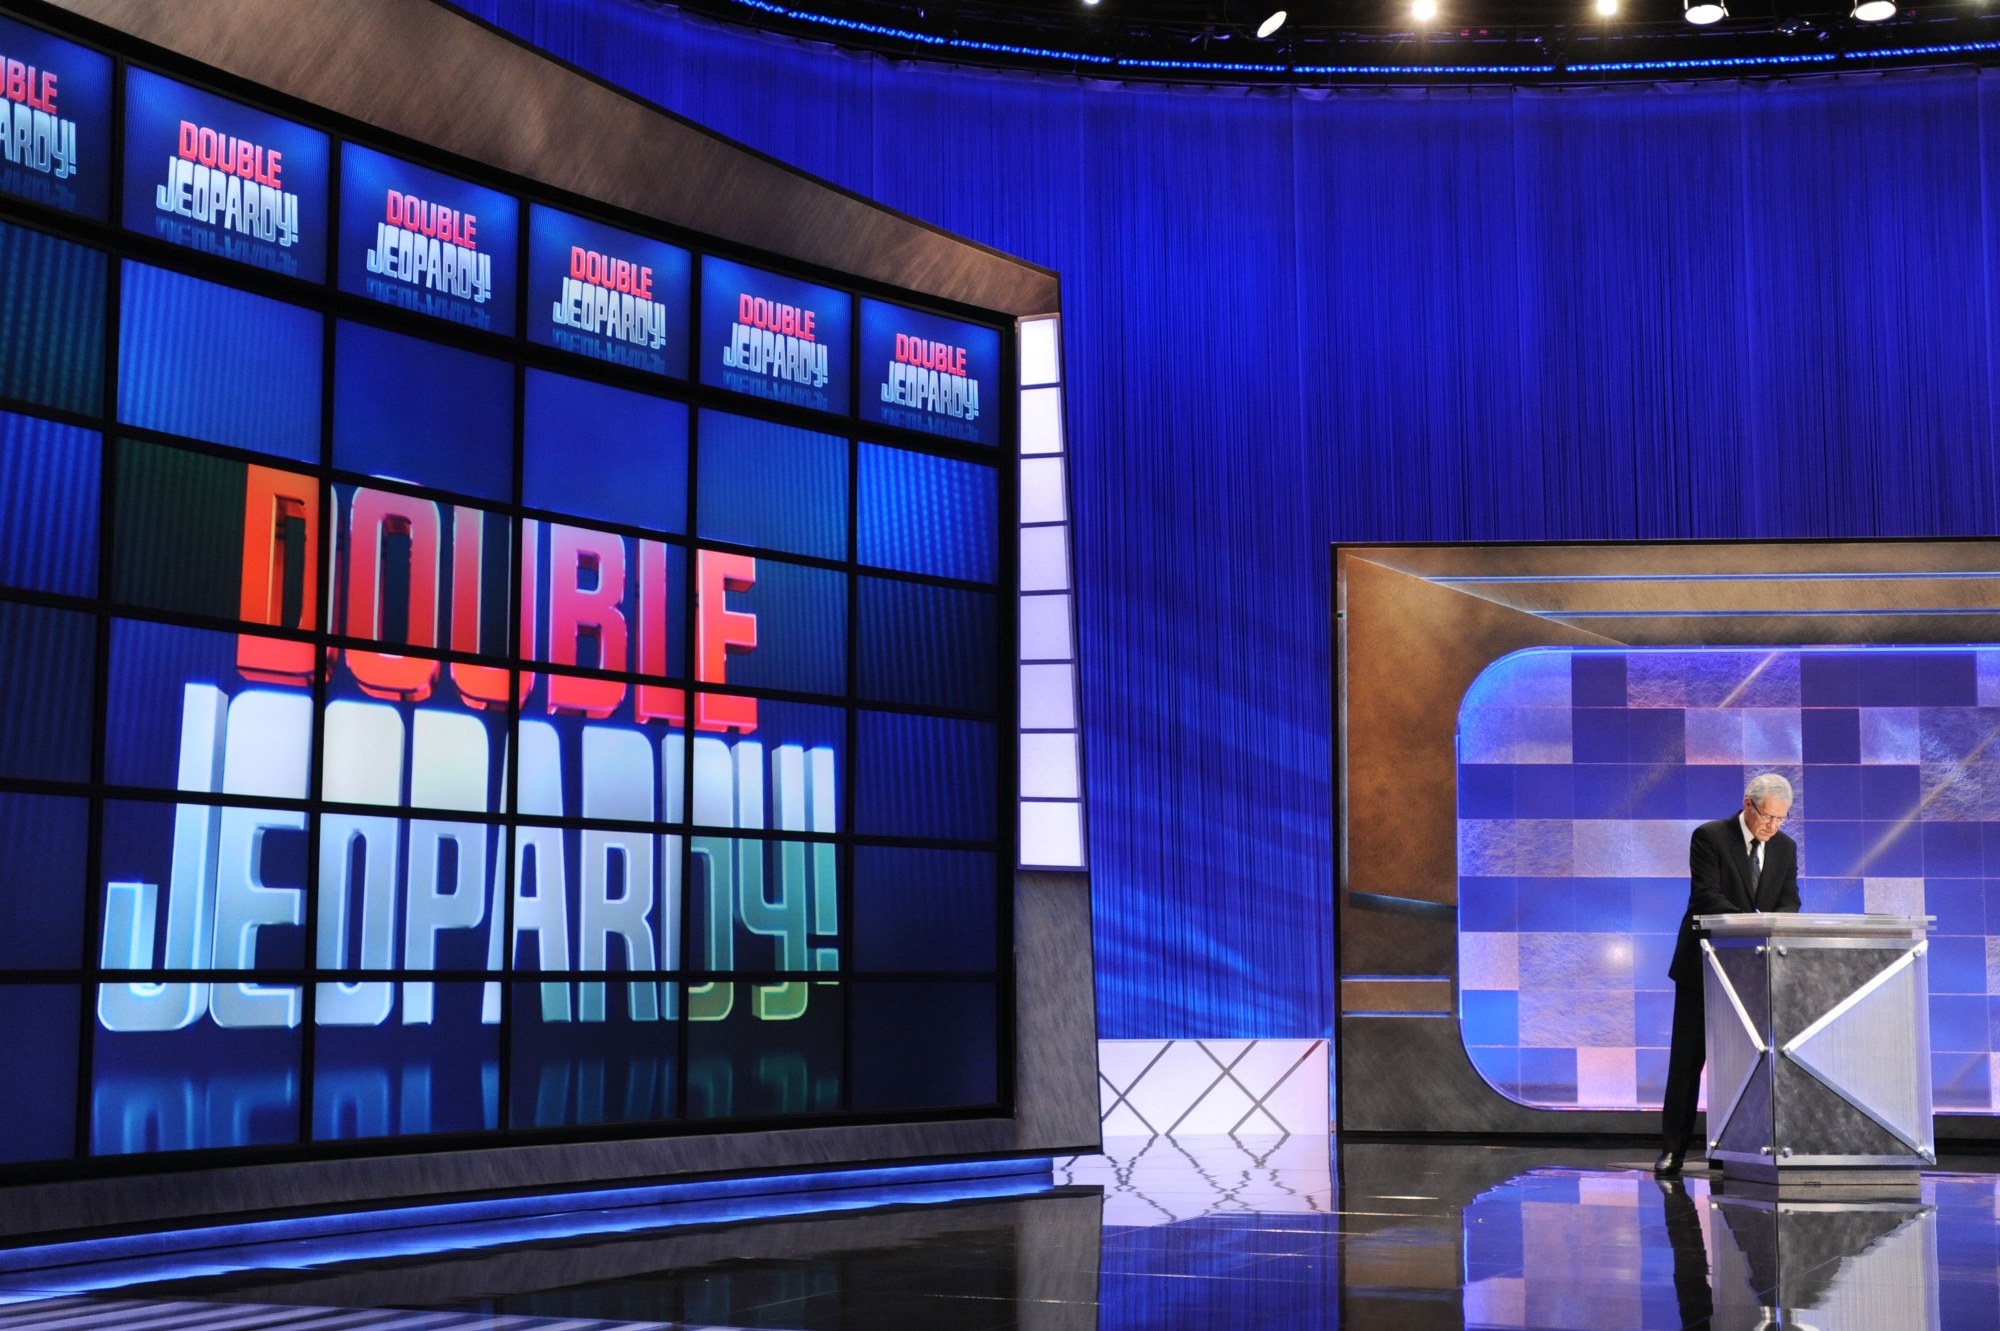 ‘Jeopardy!’: What Do Contestants Do During the Commercial Break?